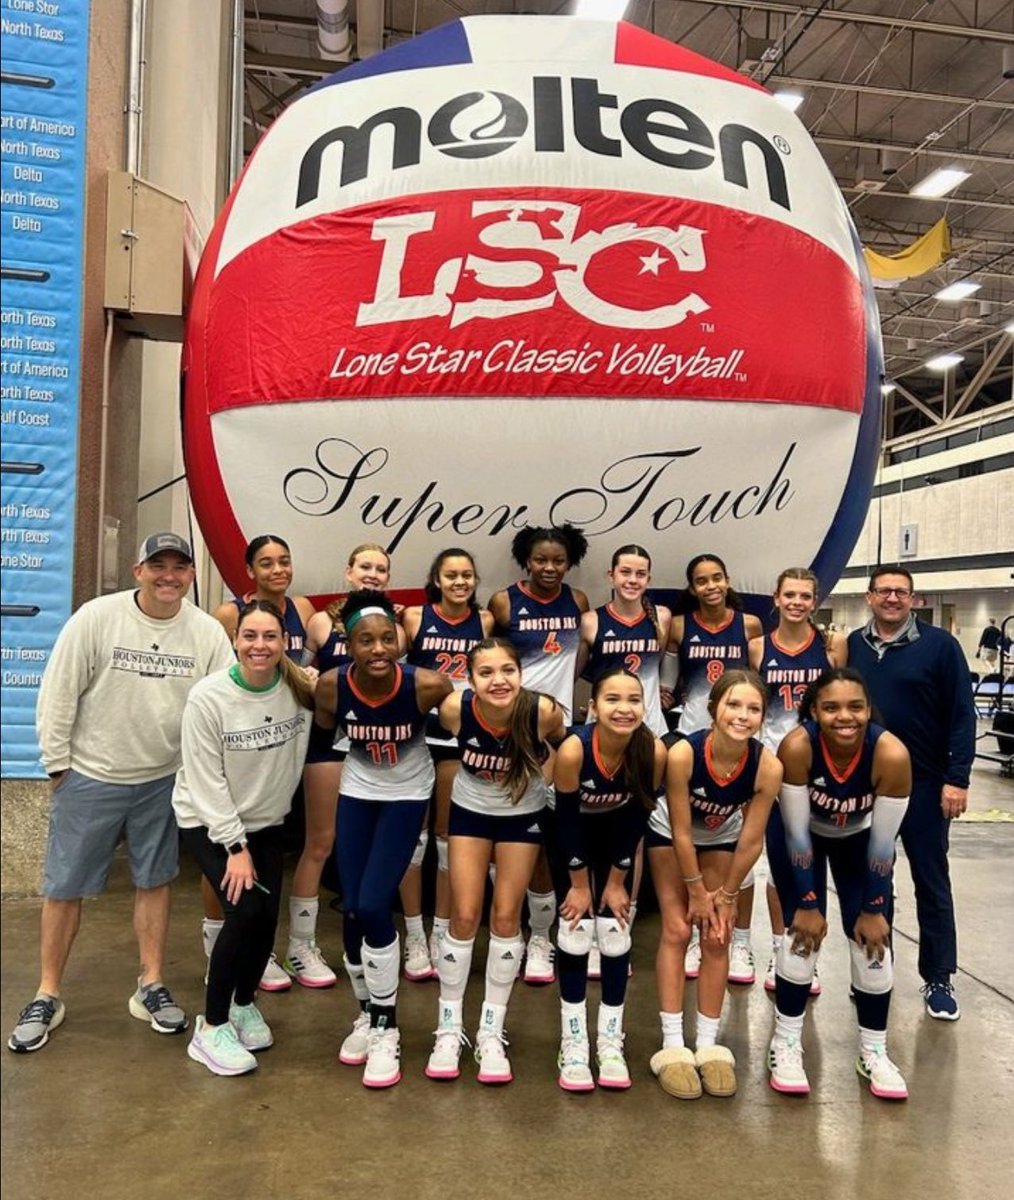 So proud of my teammates and coaches, HJV 14 Elite earned an Open bid this weekend🎊🎉🥳. See you in Vegas 🙌🏾 @MaxPreps @houstonjuniors @VBAdrenaline @PrepVolleyball @PrepDig @CyRanchVball